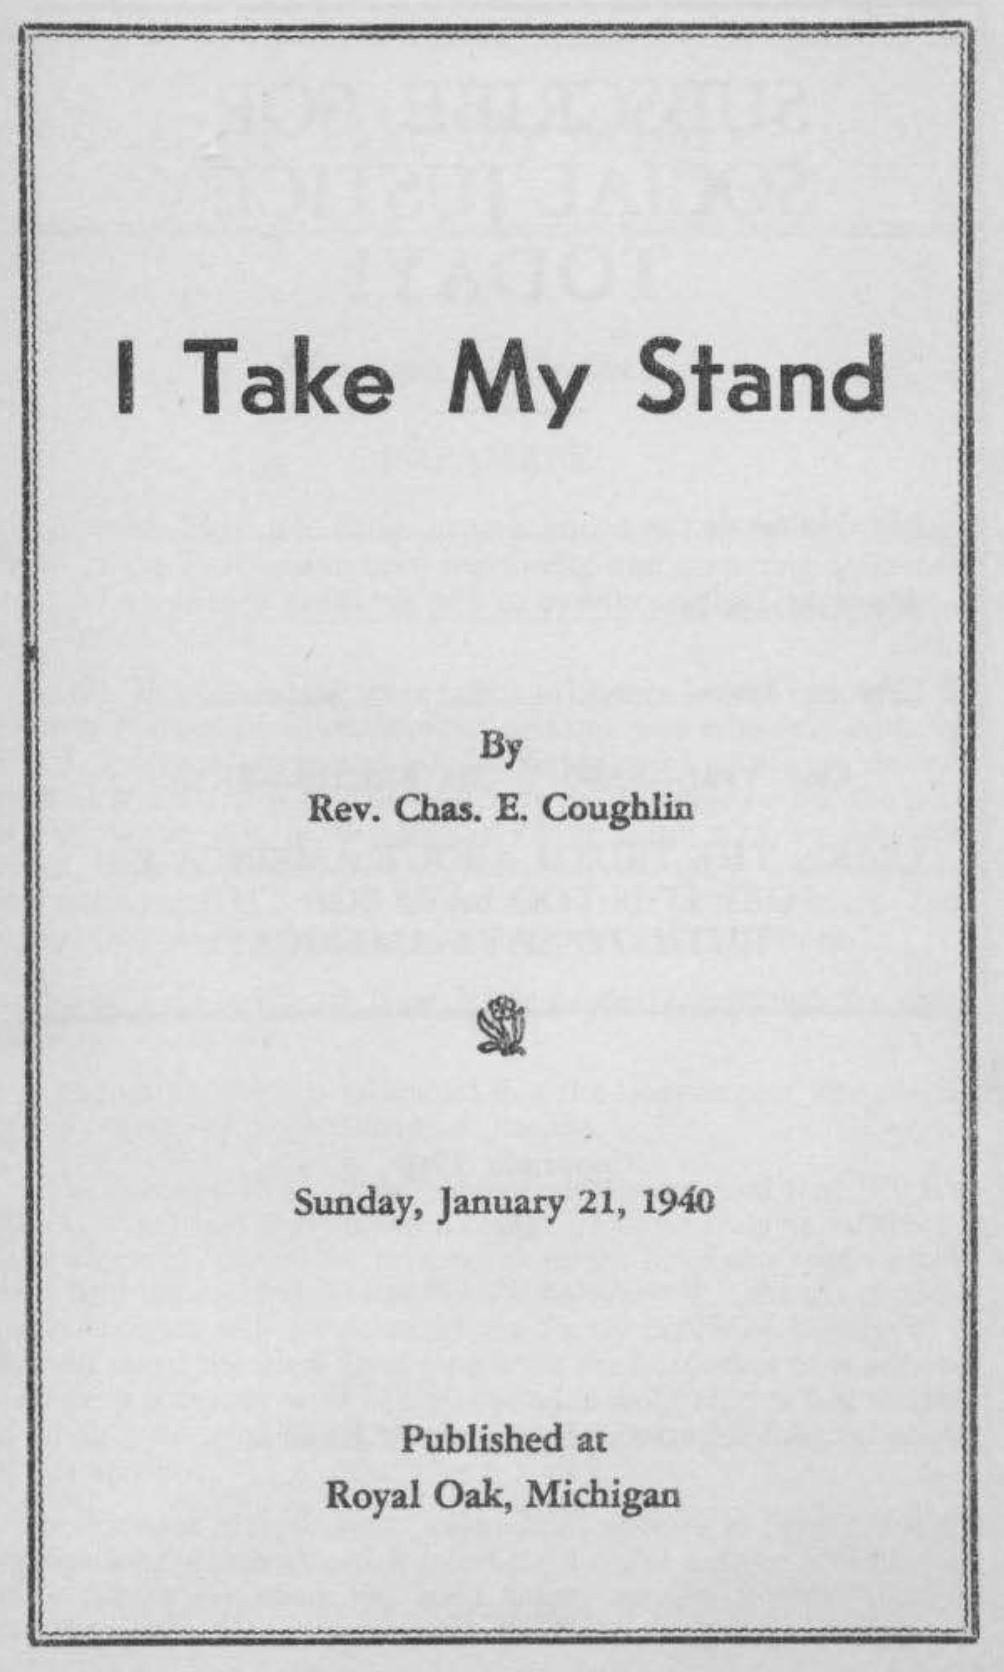 I Take My Stand (1940) by Charles E. Coughlin